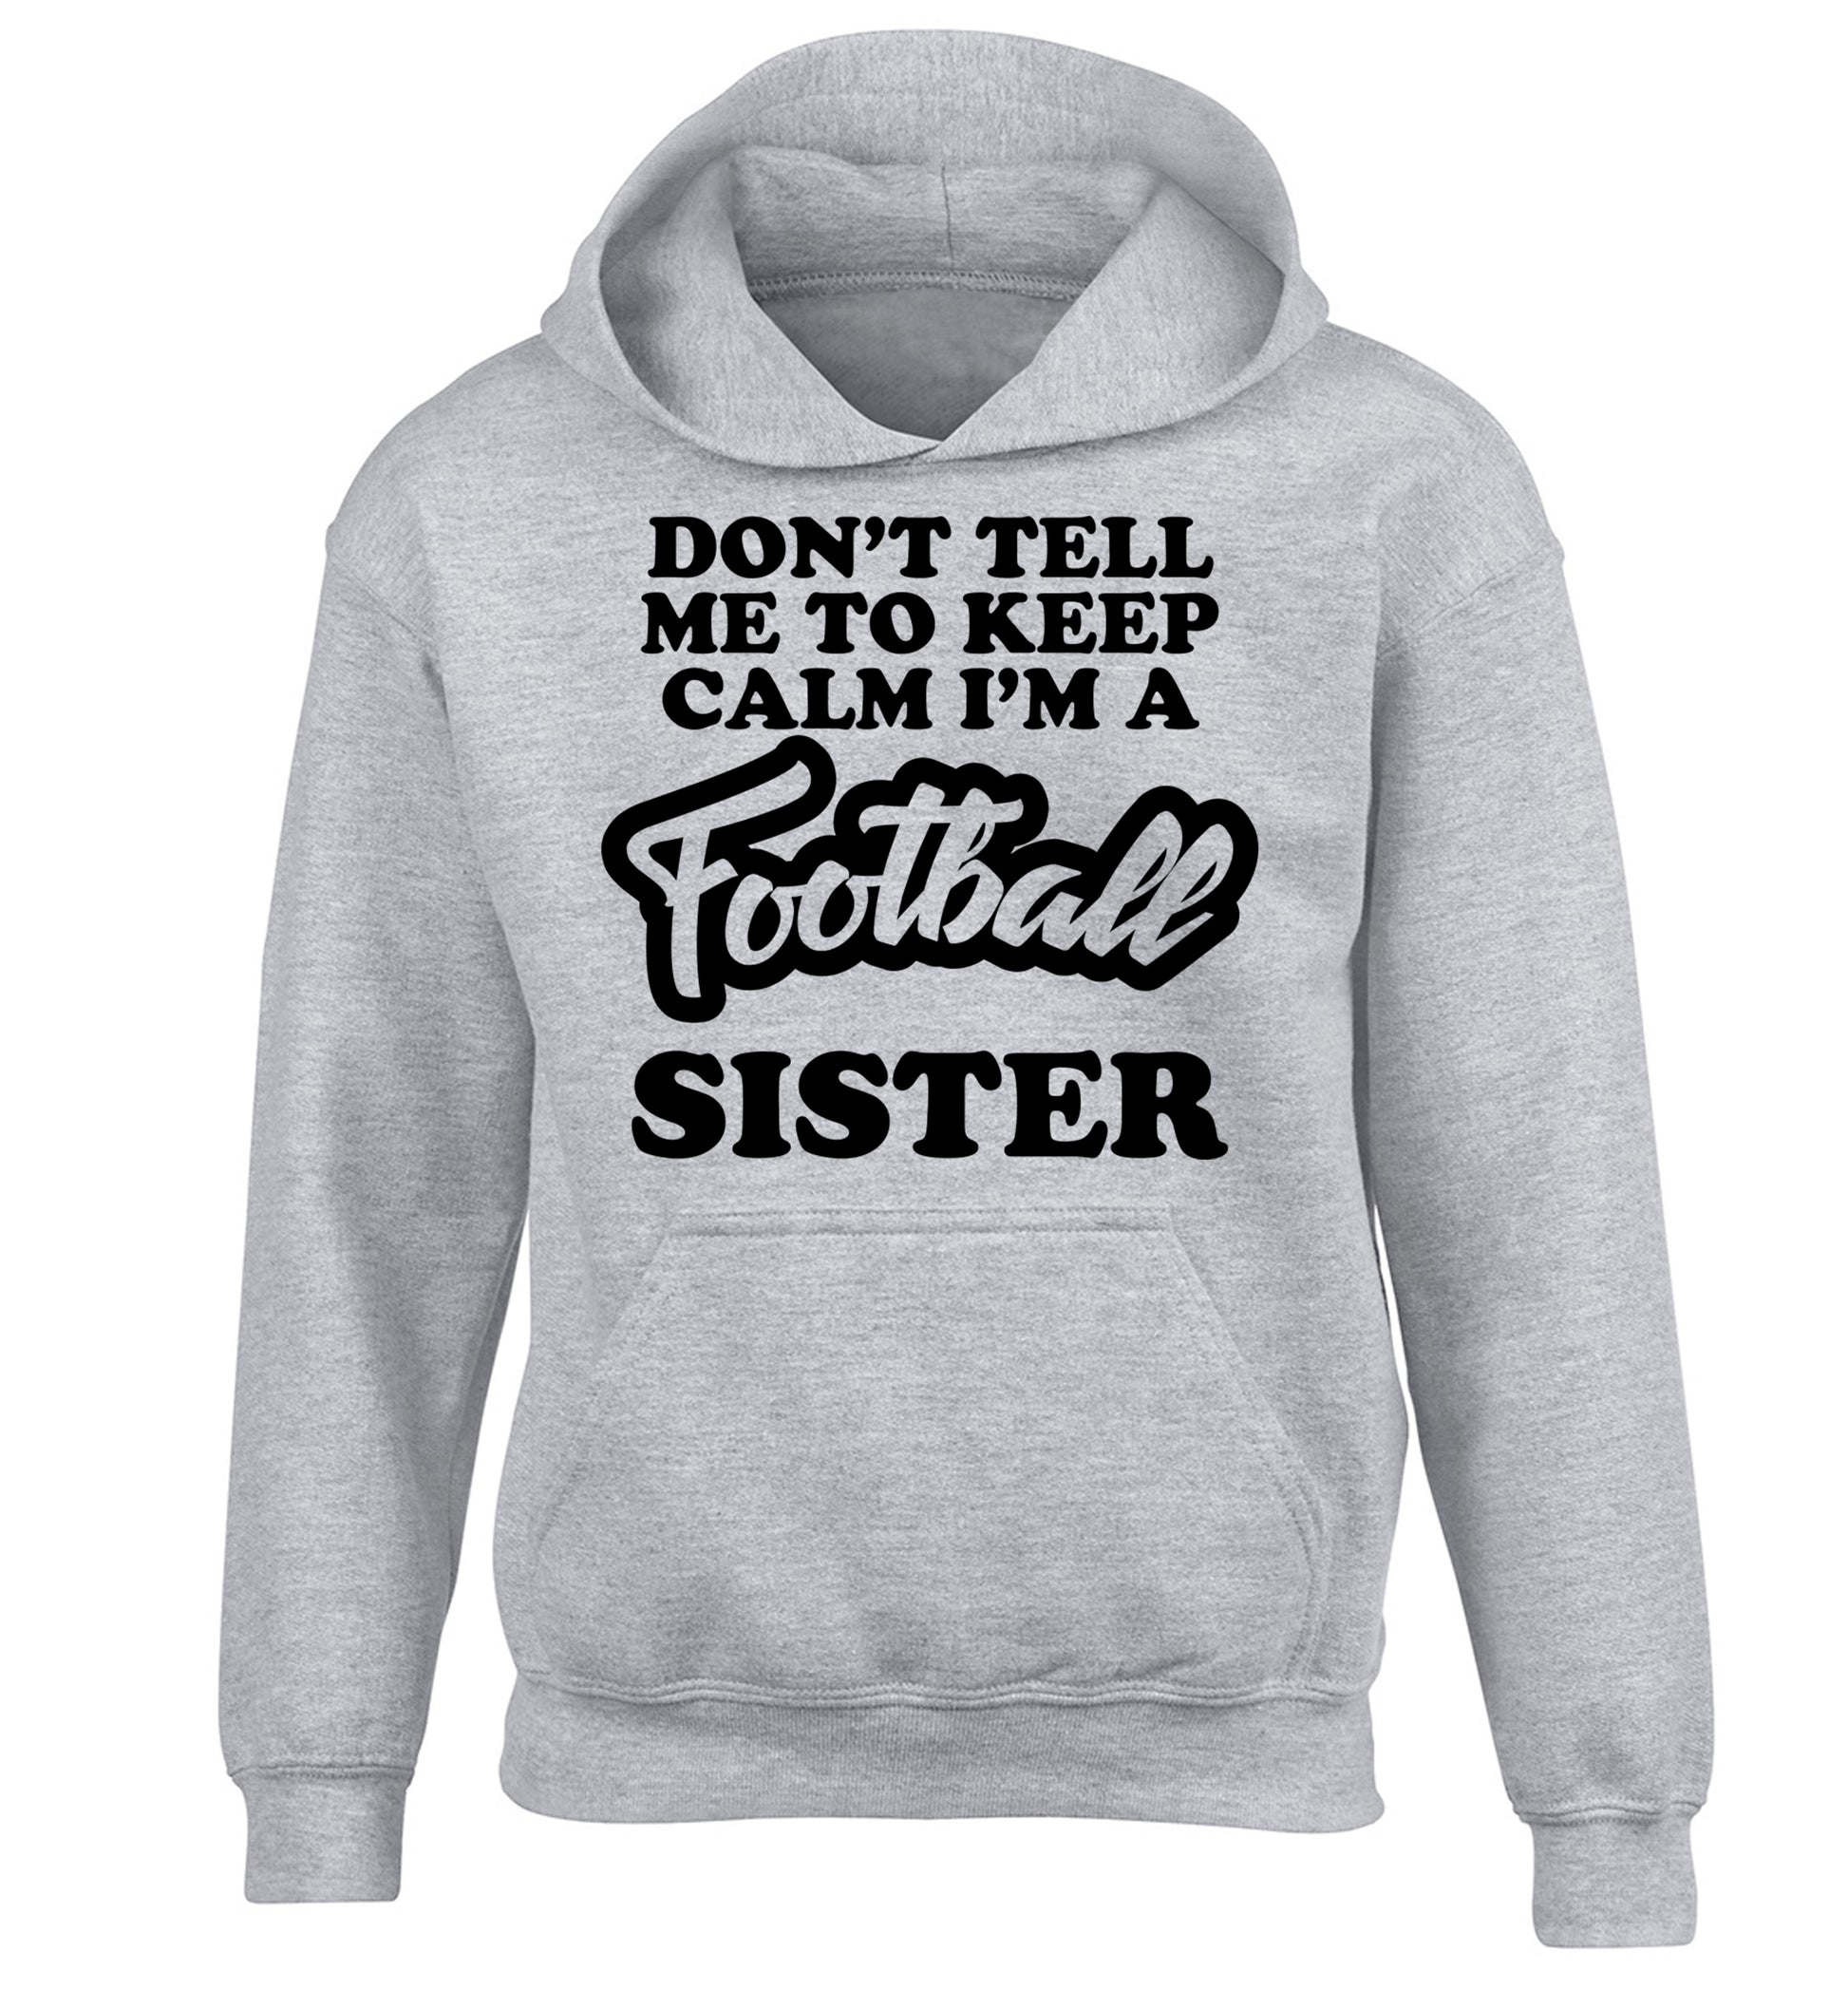 Don't tell me to keep calm I'm a football sister children's grey hoodie 12-14 Years